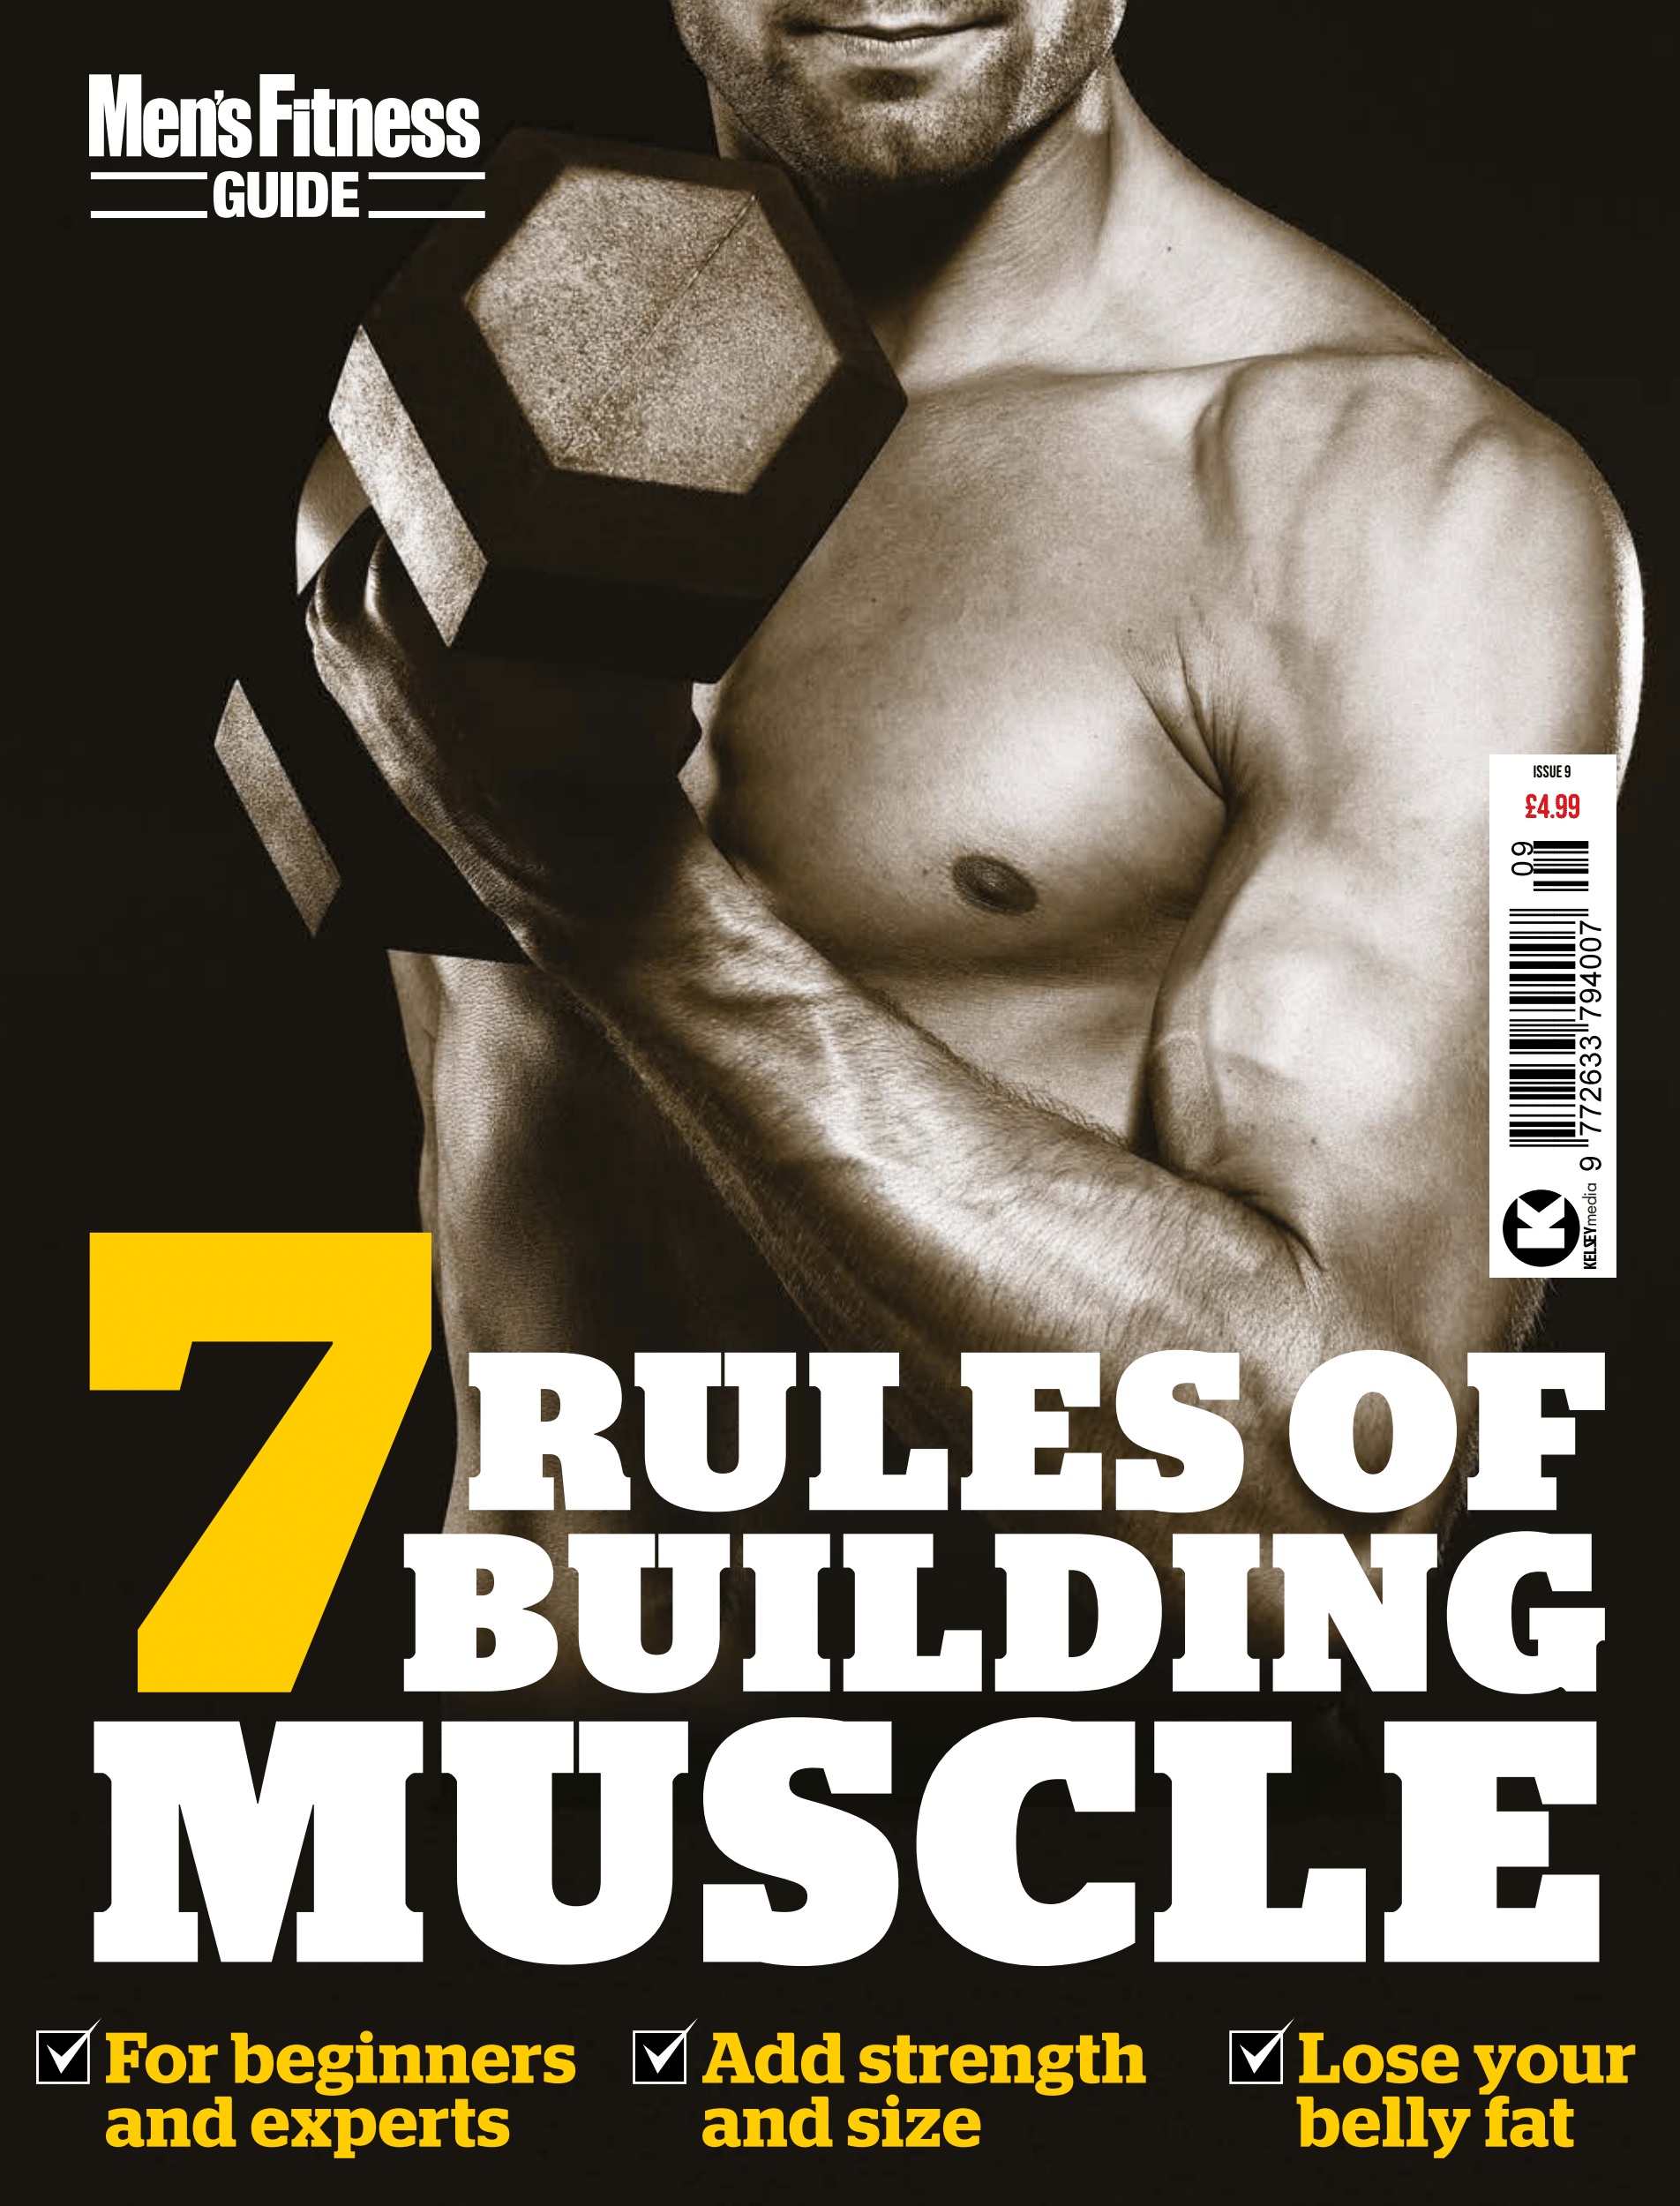 Men's Fitness Guide #9 - Rules of Building Muscle